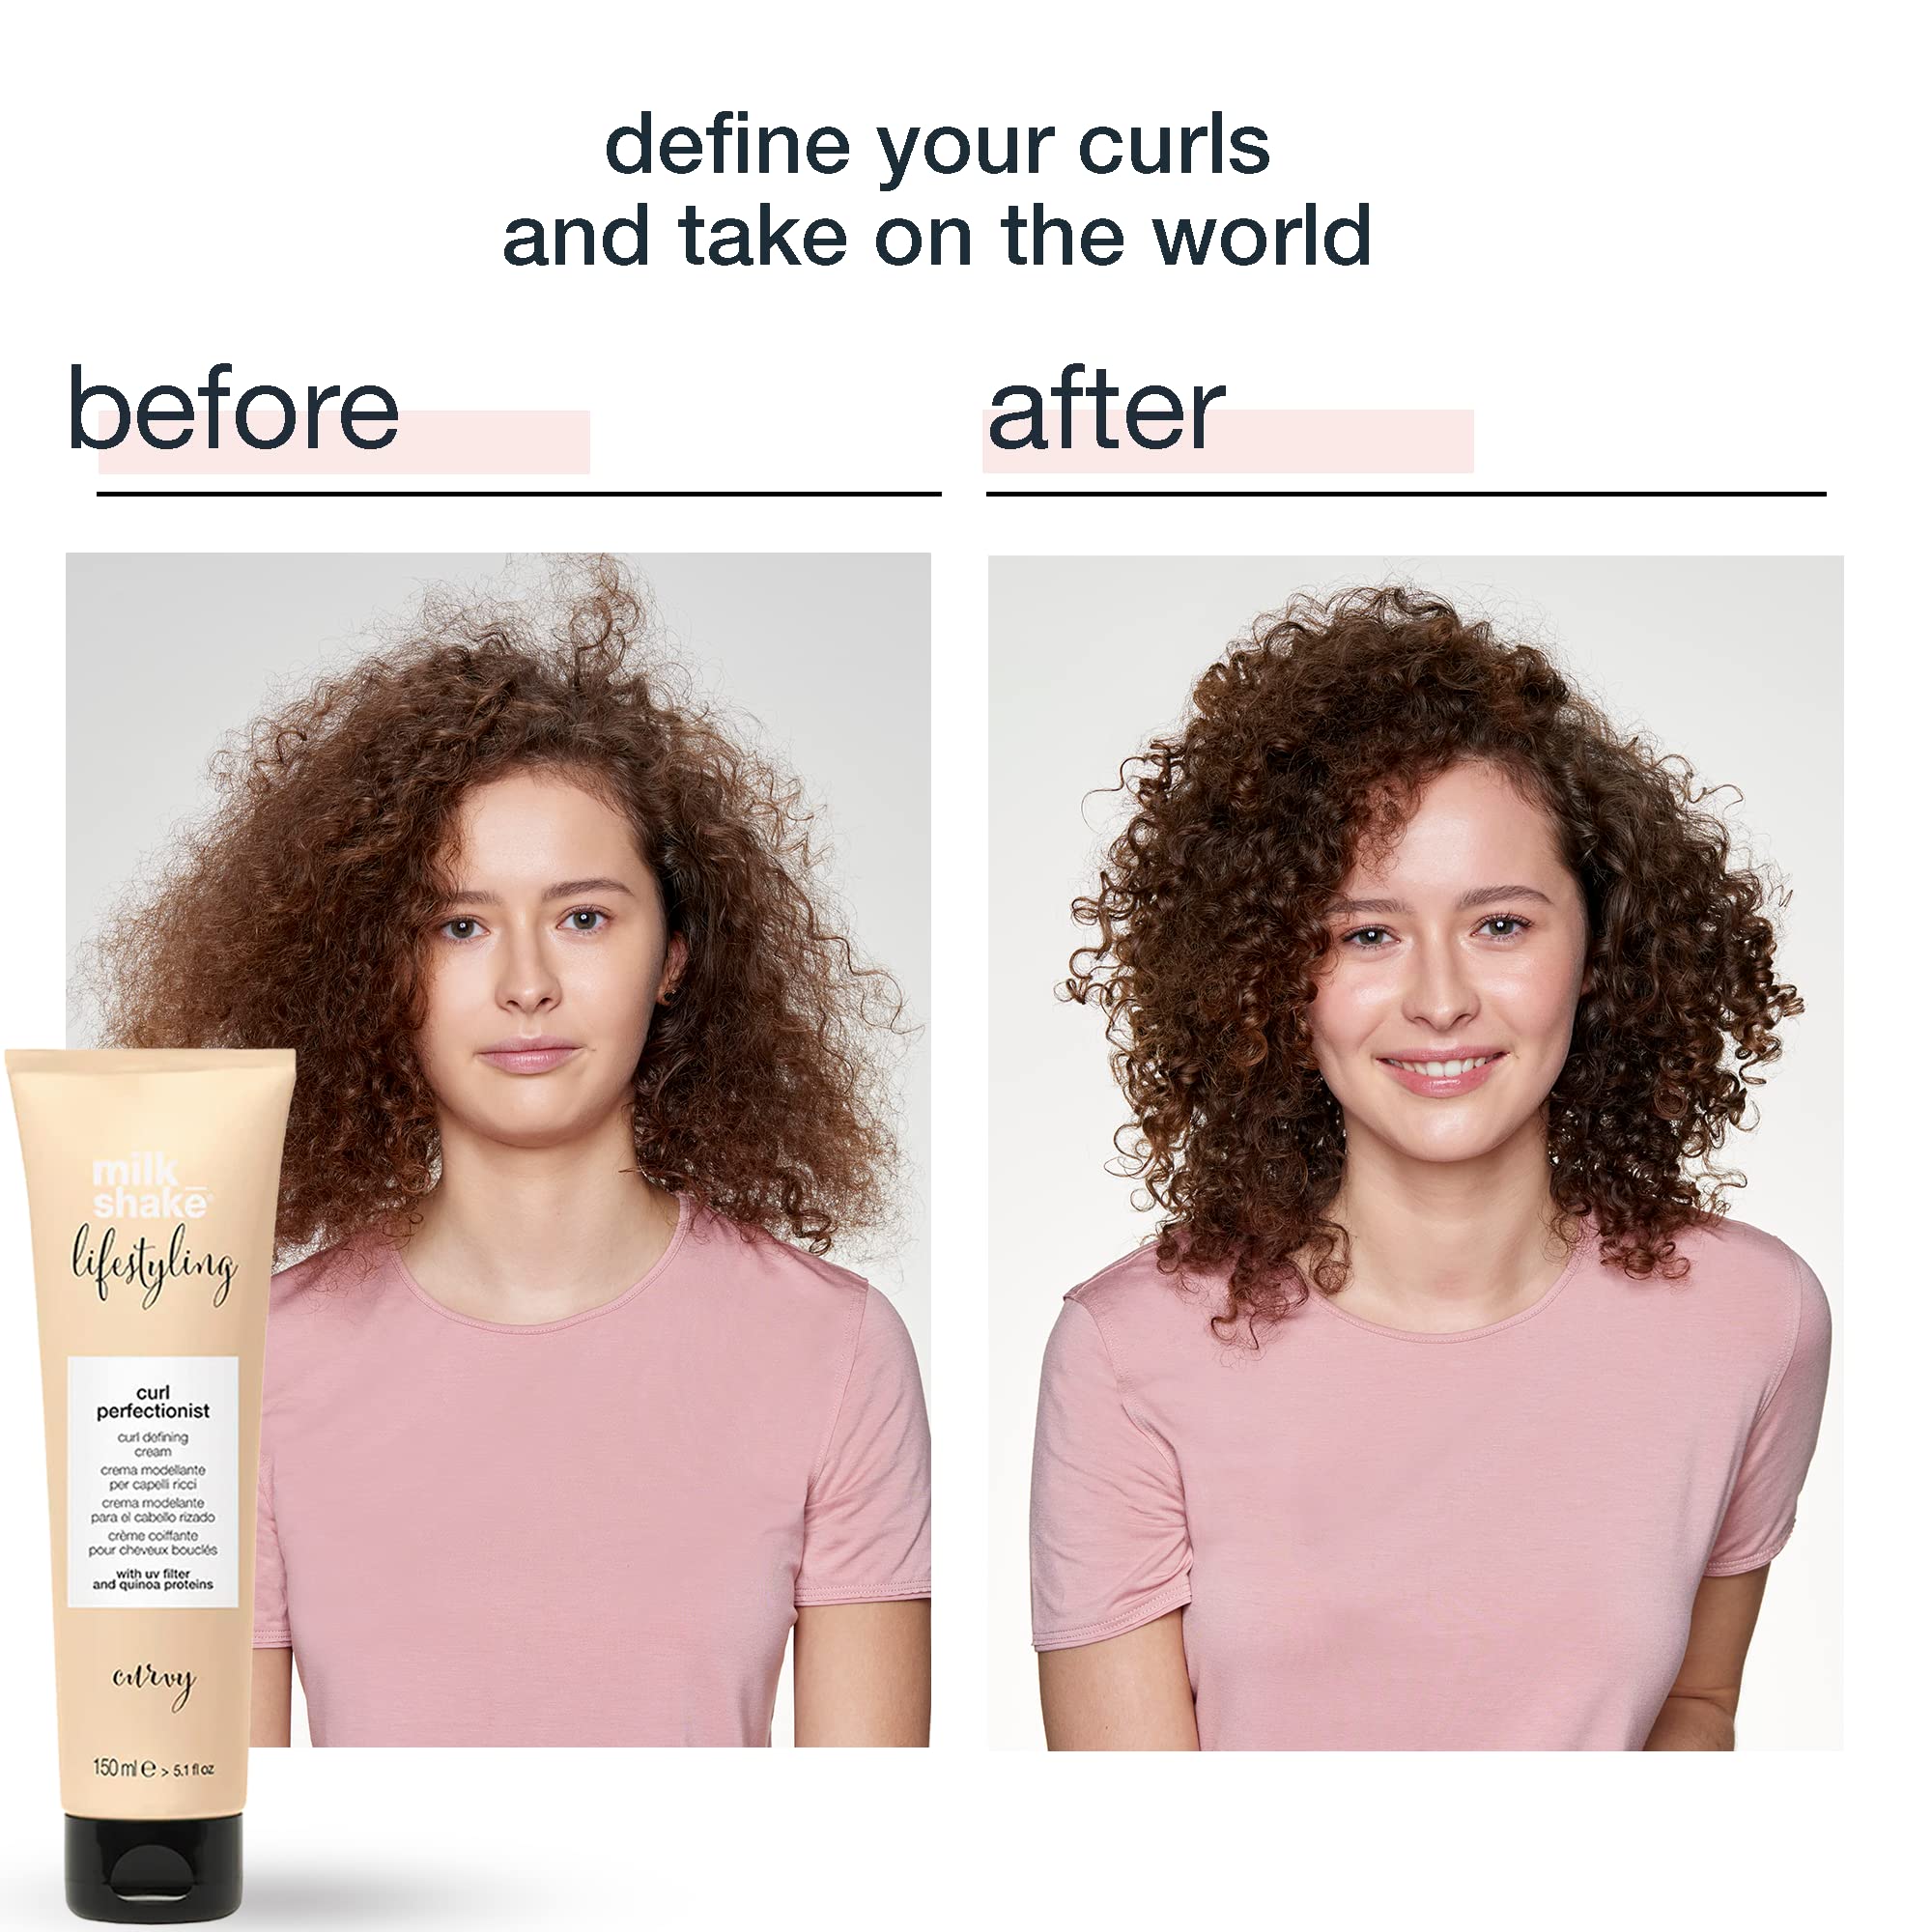 milk_shake Curl Perfectionist Curl Defining Cream - Curl Cream for Curly Hair and Wavy Hair, 5.1 Fl oz